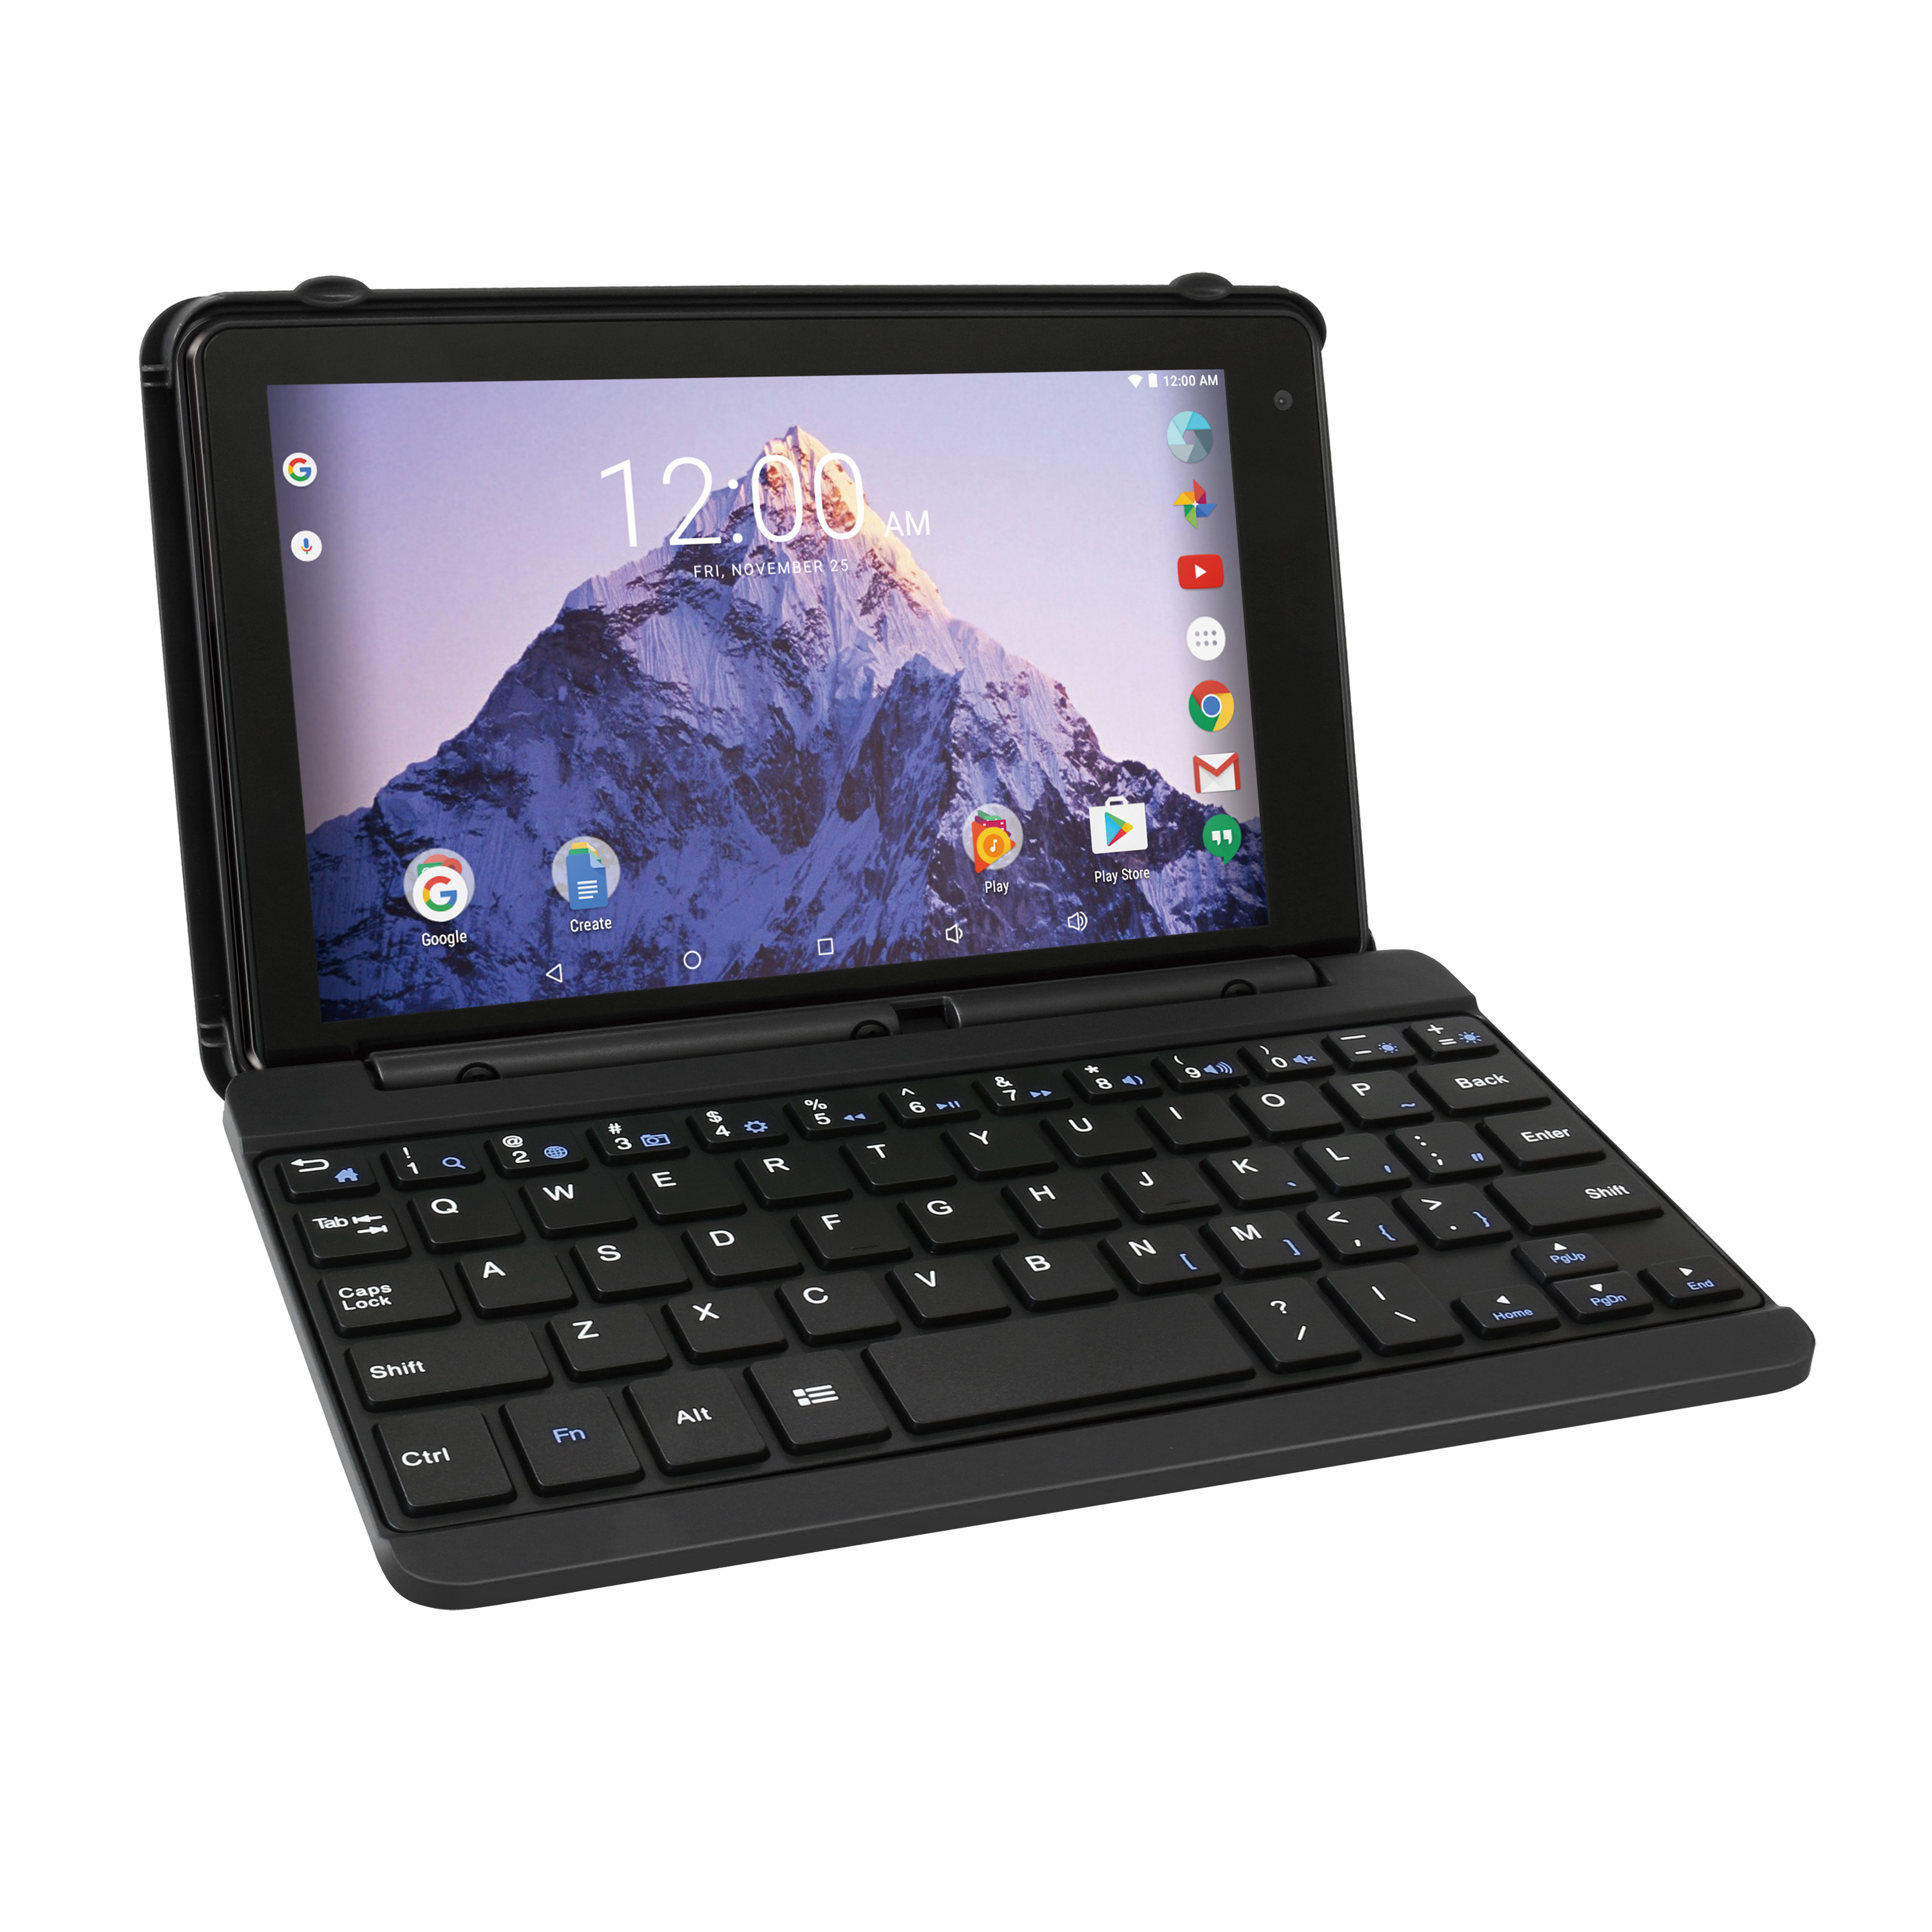 RCA Voyager 7" 16GB Tablet with Keyboard Case ONLY $39.99!! (reg. $69